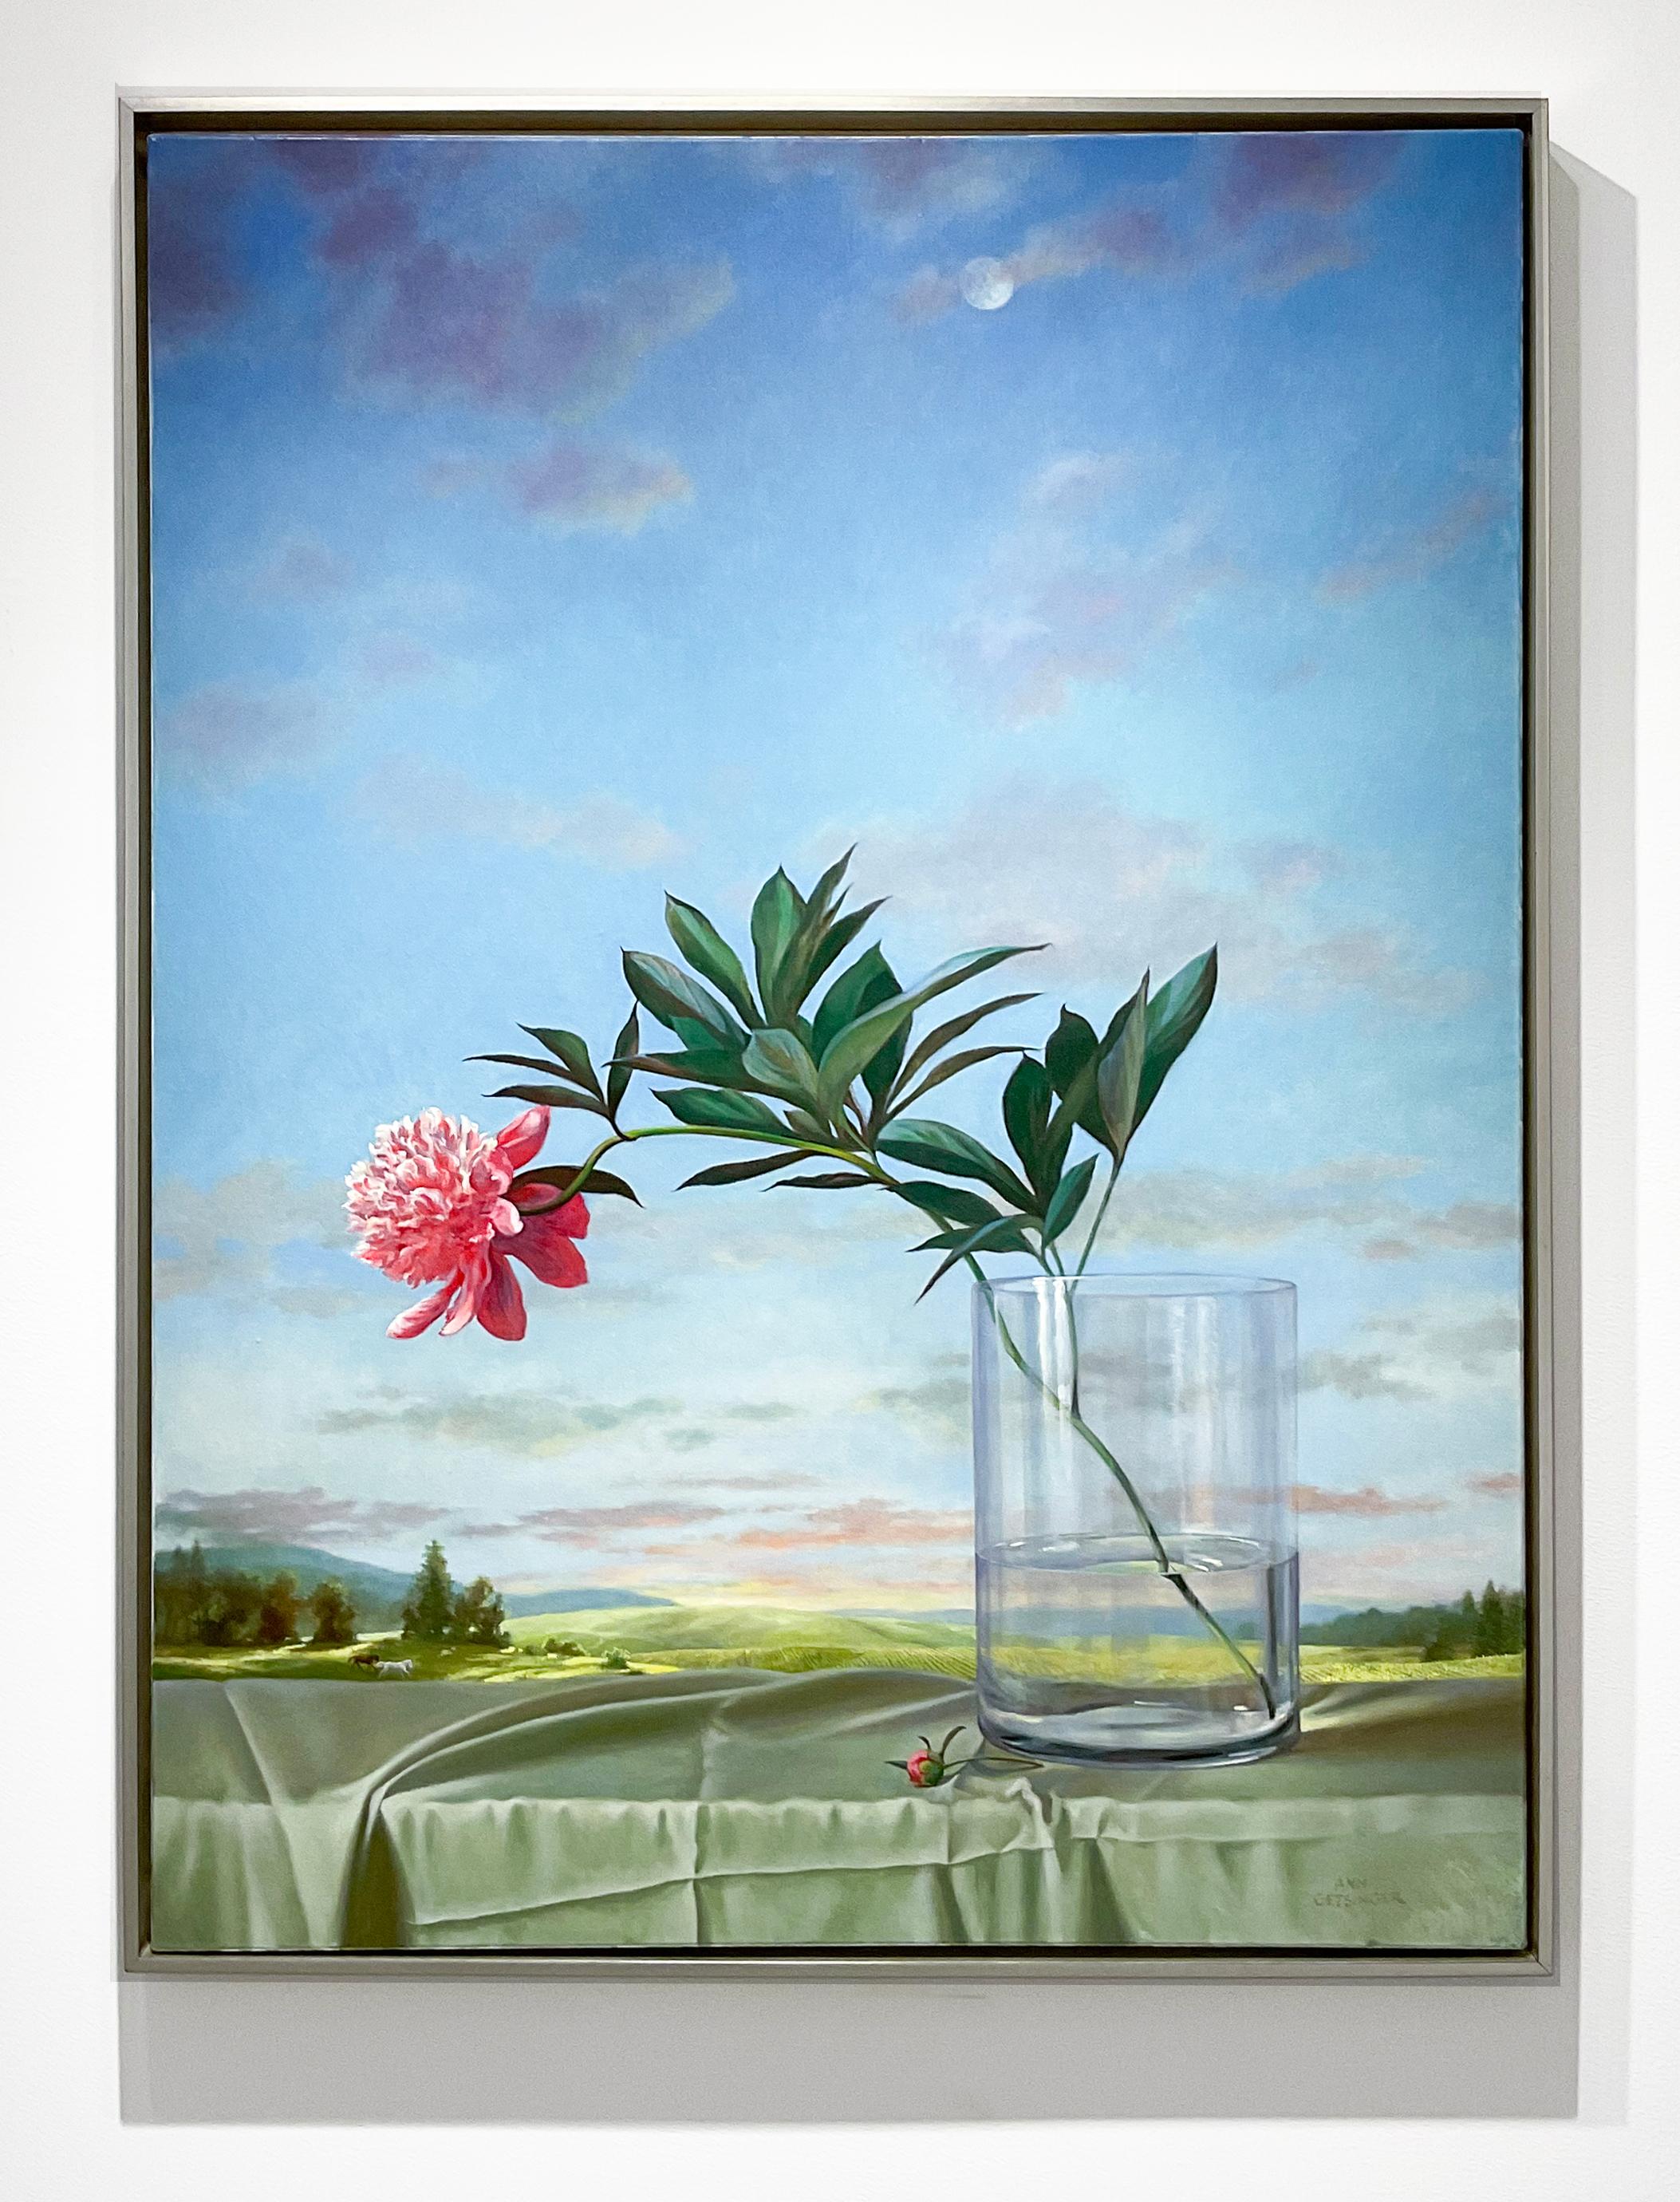 Leaping Peony (Still Life Painting with Pink Flower and Country Landscape)